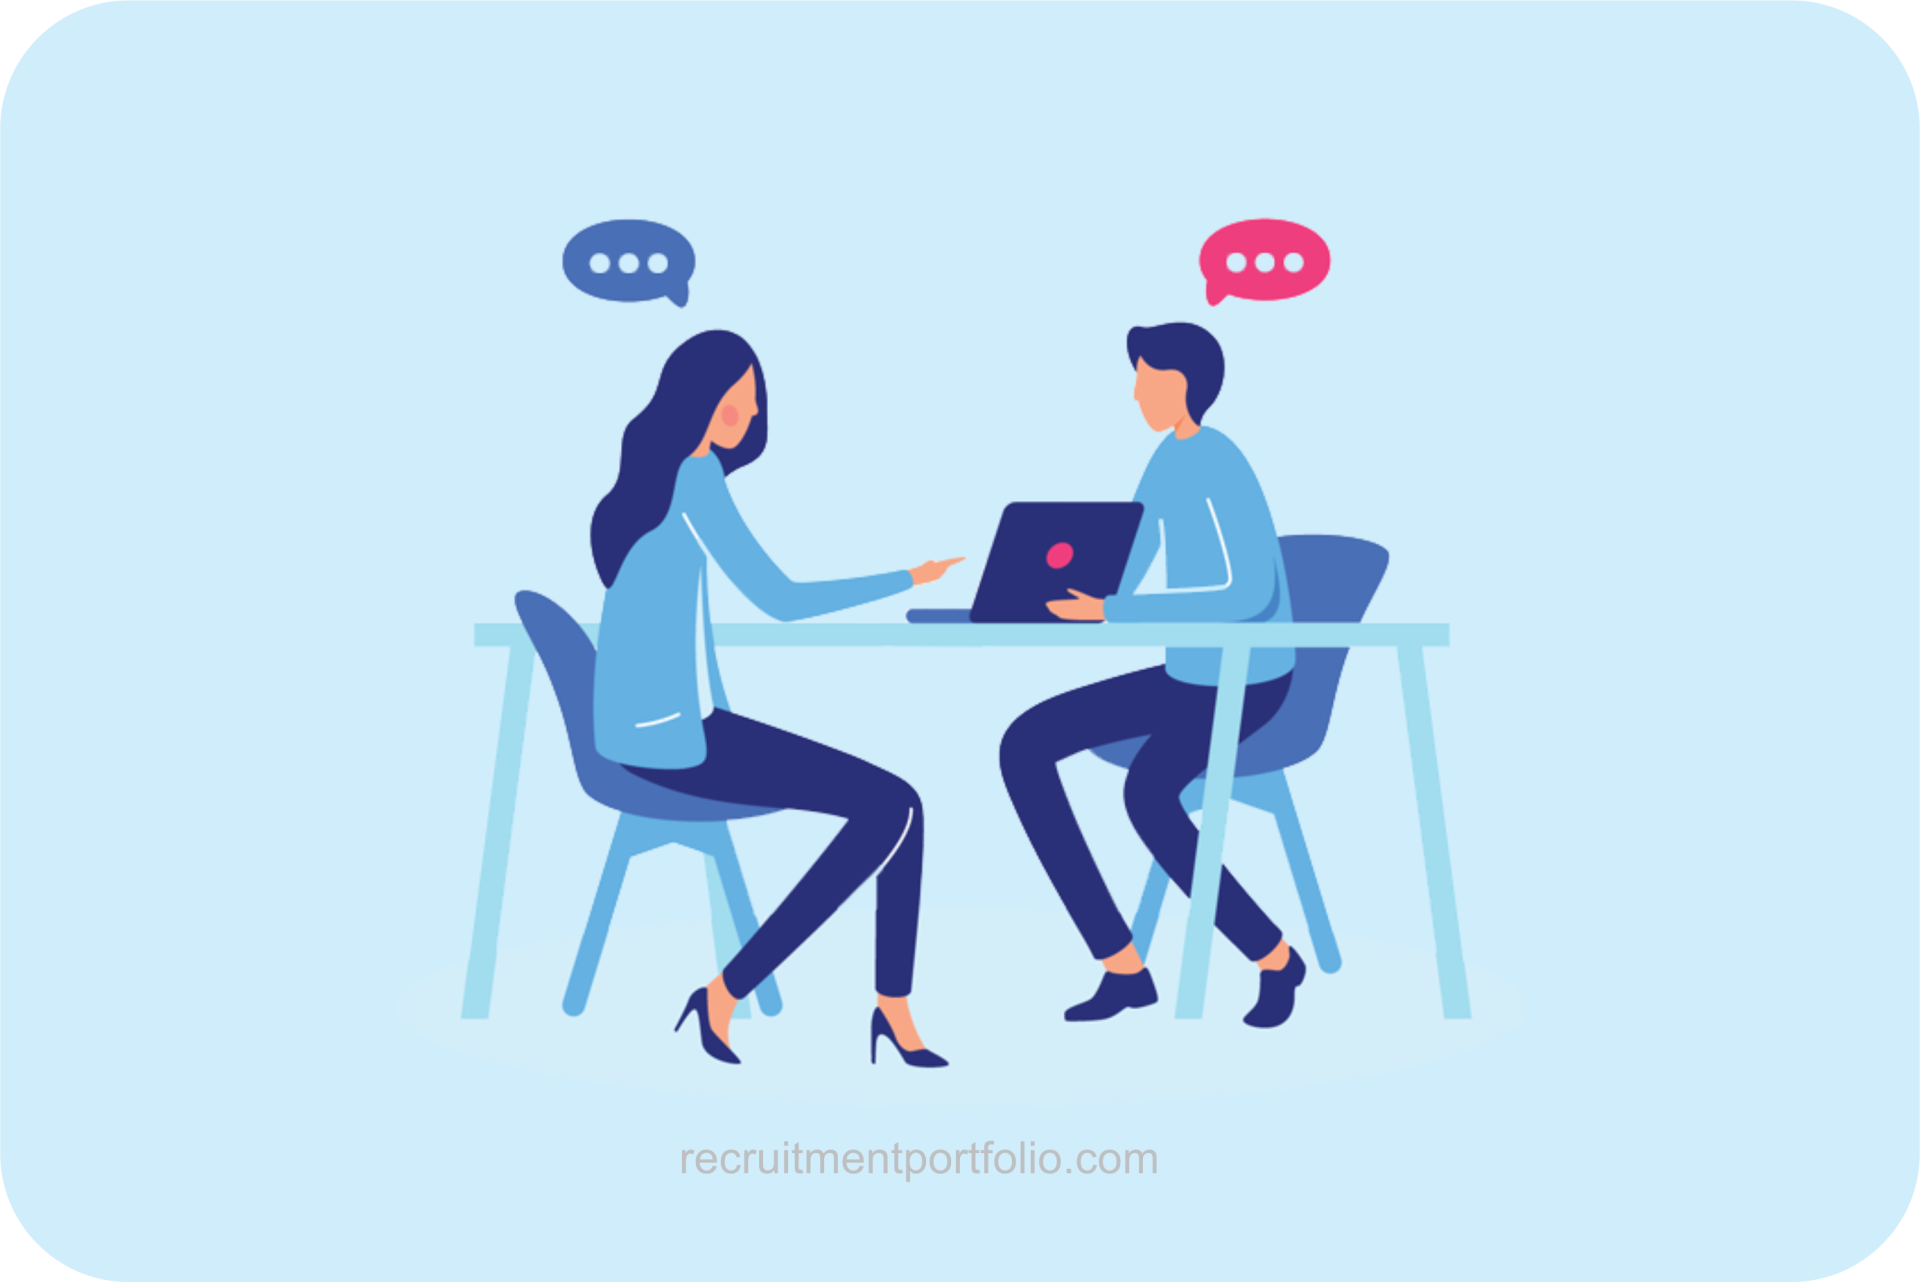 Rehearse your interview questions